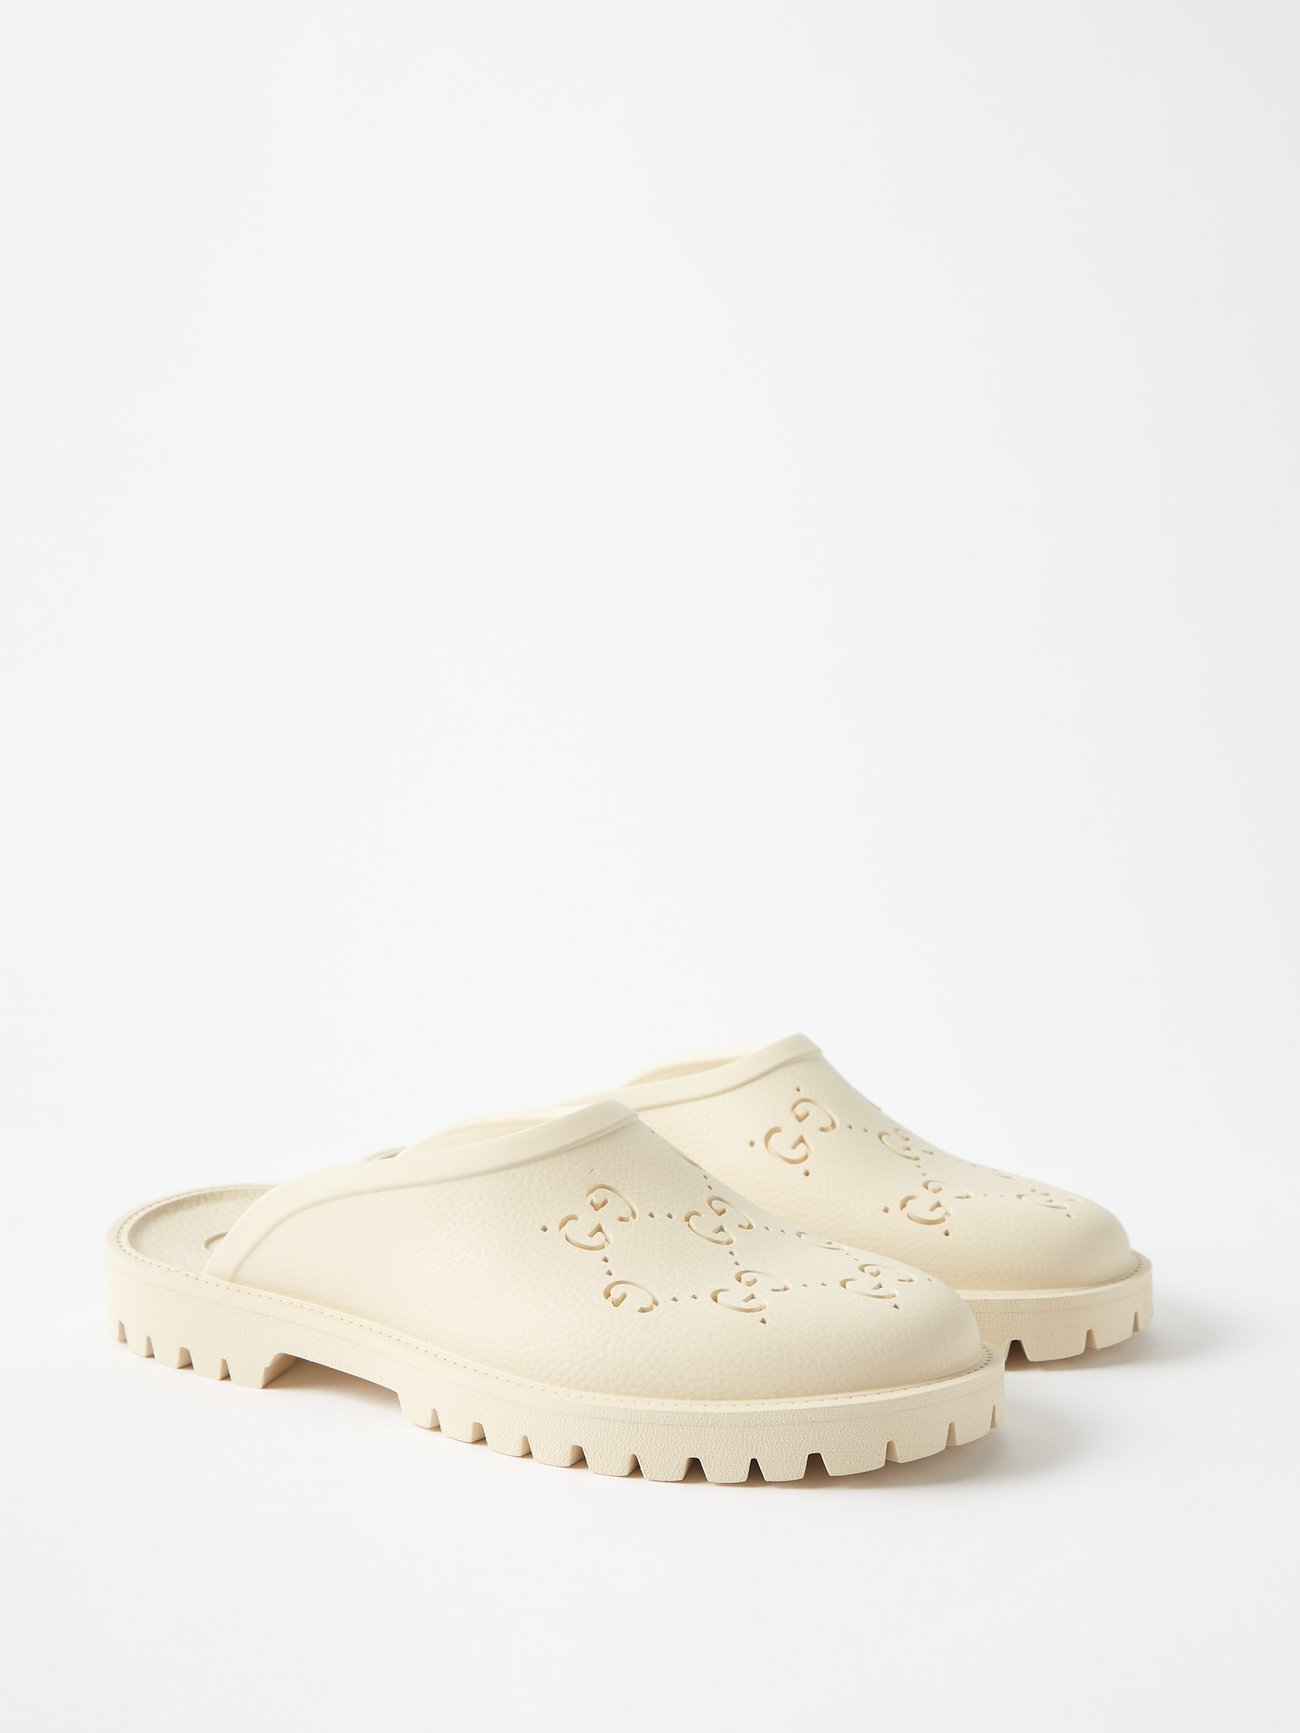 Women's platform perforated G sandal in white rubber